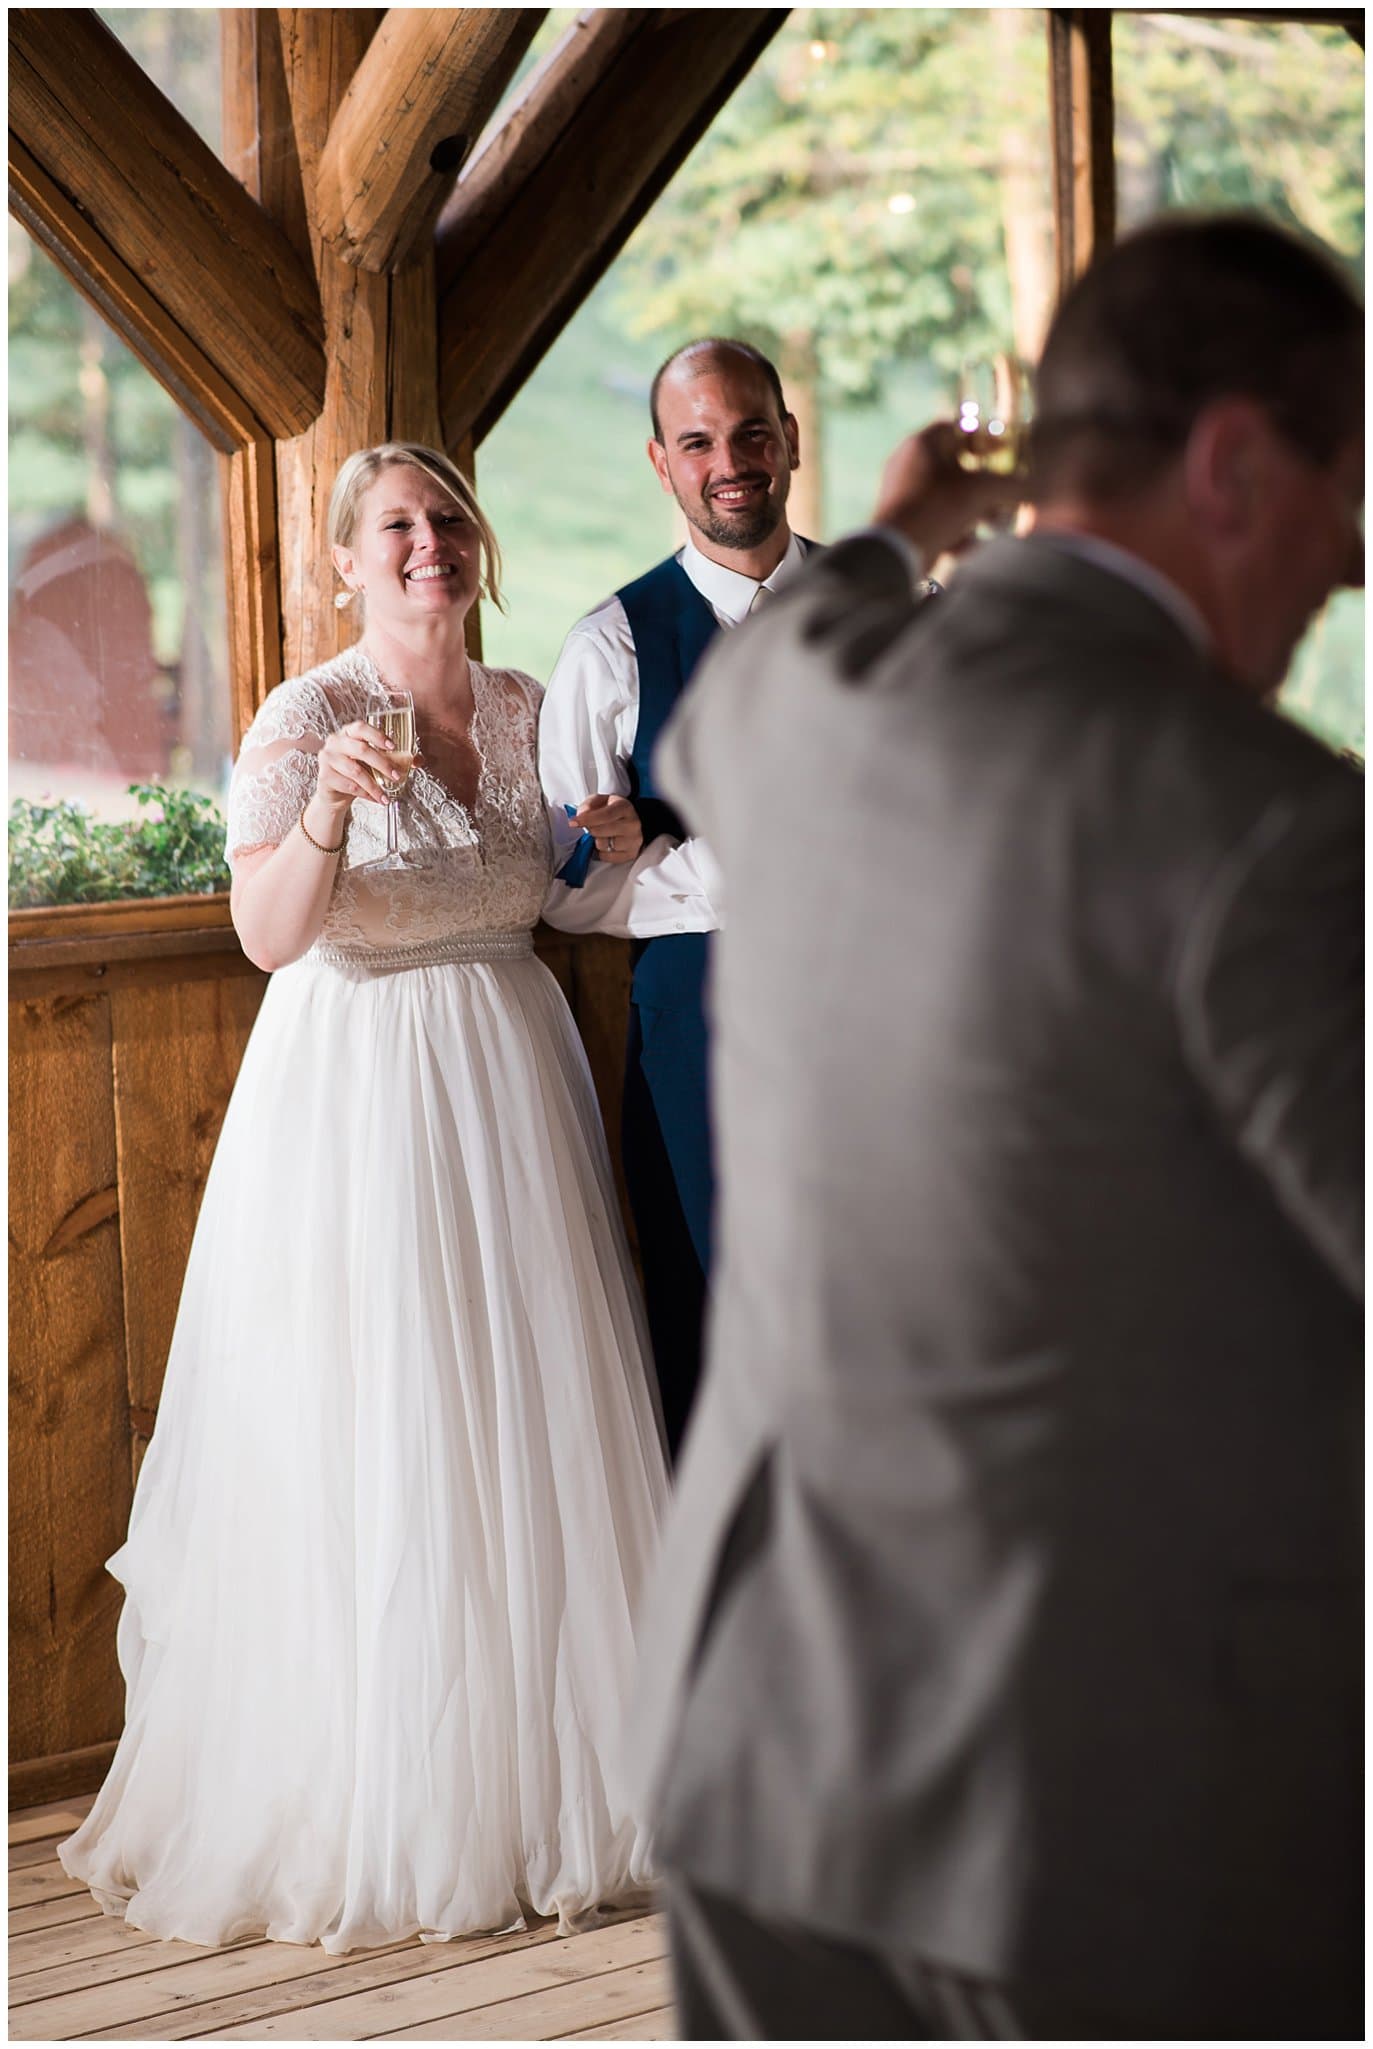 toasts during wedding reception at Piney River Ranch wedding by Vail wedding photographer Jennie Crate photographer